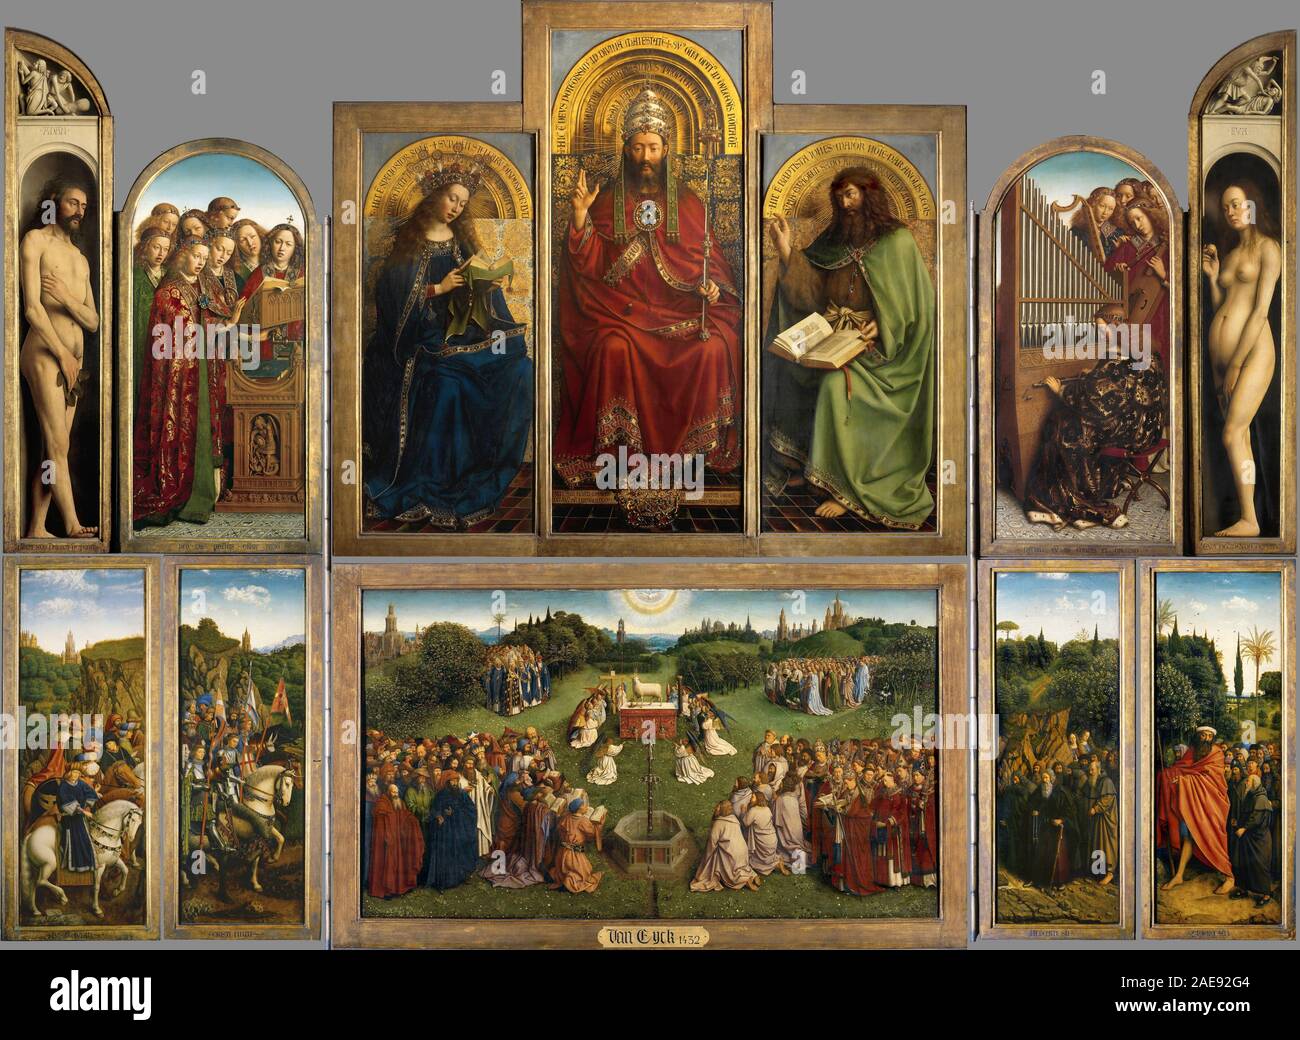 Ghent Altarpiece, (1432) The Ghent Altarpiece (or the Adoration of the Mystic Lamb) a large and complex 15th-century polyptych altarpiece in St Bavo's Cathedral, Ghent, Belgium. Painting by Hubert and Jan van Eyck, Stock Photo